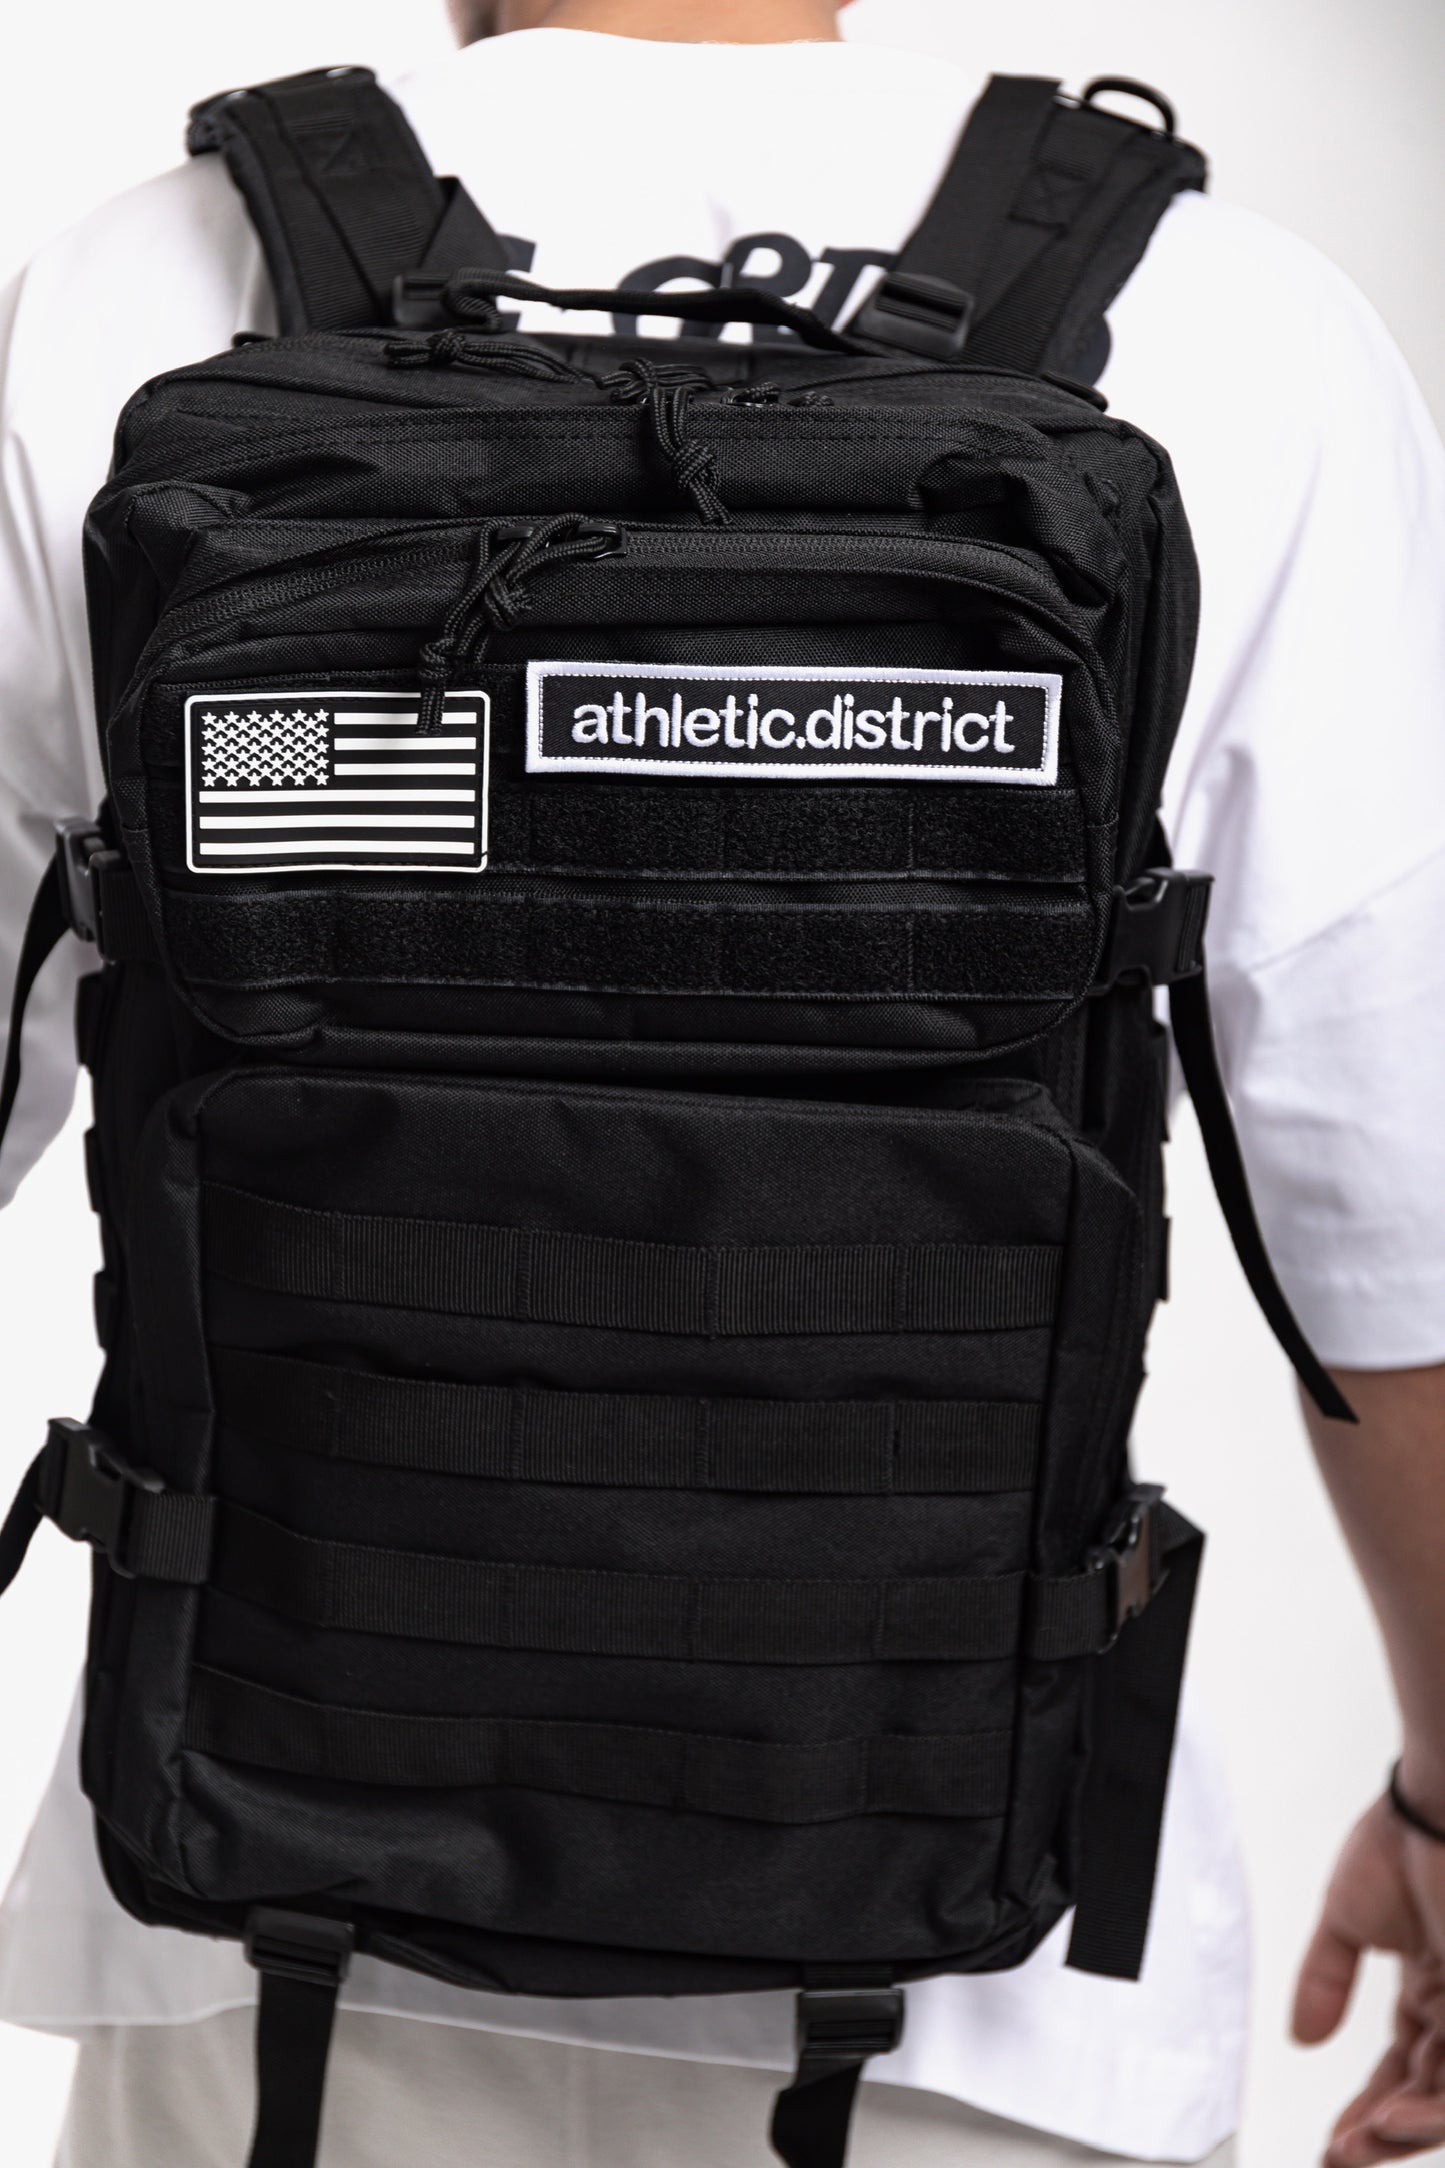 ATHLETIC DISTRICT - FITNESS RUCKSACK